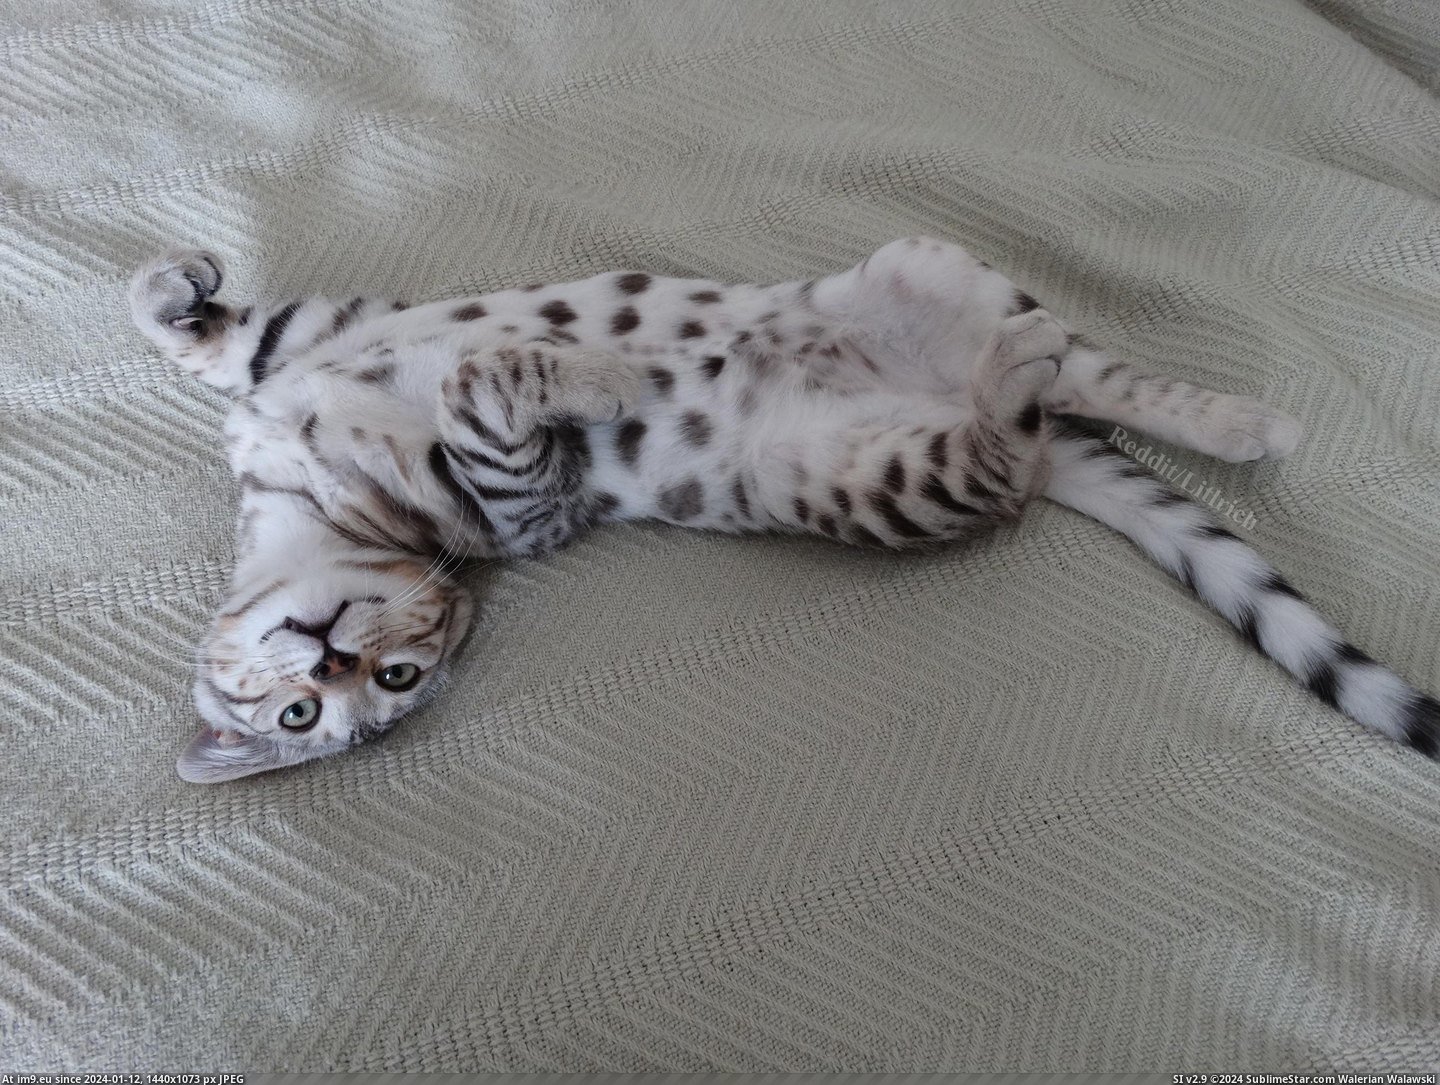 #Time #Kitten #Rub #Decided #Belly [Aww] I just got home to see my kitten has already decided it's time for a belly rub Pic. (Image of album My r/AWW favs))